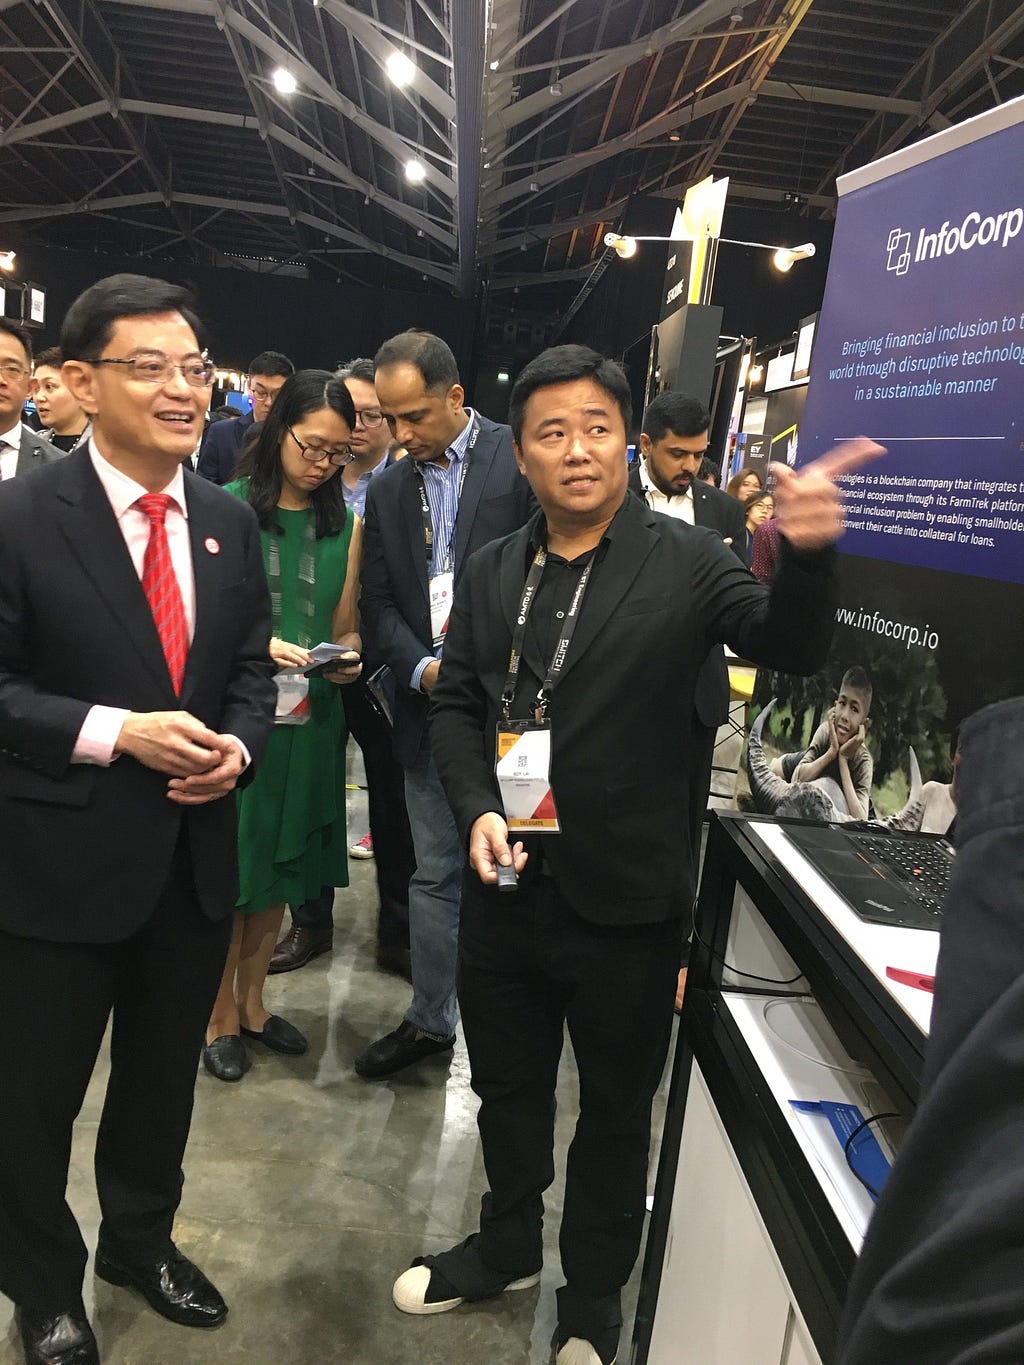 Deputy Prime Minister Heng Swee Keat was impressed that a Singaporean company can create a solution for agriculture sector